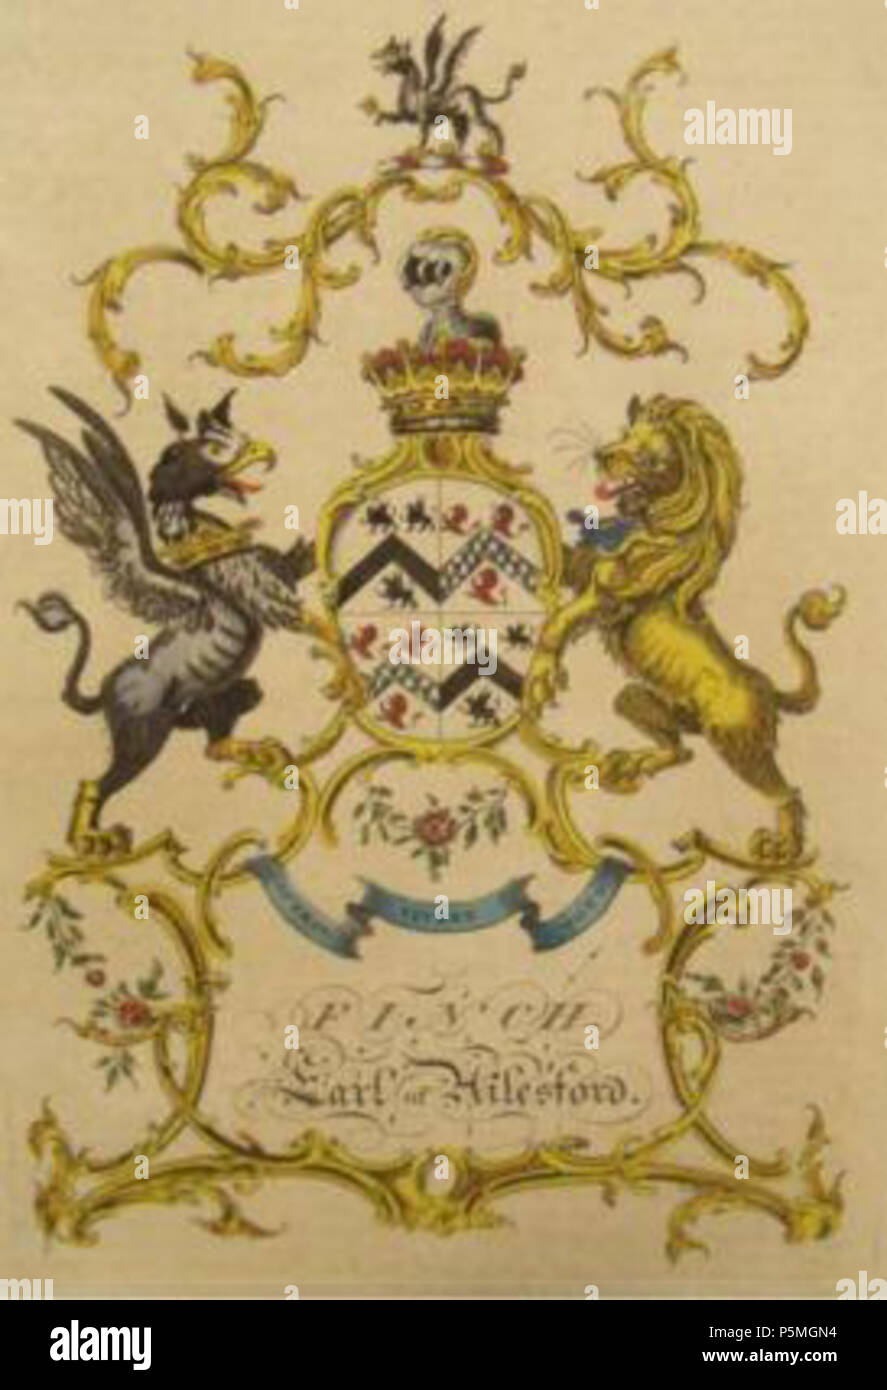 N/A. English: Arms of Heneage Finch, 3rd Earl of Aylesford (1715-1777), print from Alexander Jacob’s three volume work, “A Complete English Peerage,” London, 1766-1769. Arms: Quarterly 1st & 4th: Argent, a chevron between three griffins passant sable (Finch); 2nd & 3rd: Argent, a chevron vair between three demi-lions rampant gules (Fisher of Great Packington, Warwickshire). Crest: A griffin passant sable. Supporters: dexter: A griffin sable ducally gorged or; sinister: A lion or ducally gorged azure[1] . between 1766 and 1769. print from Alexander Jacob’s three volume work, “A Complete English Stock Photo